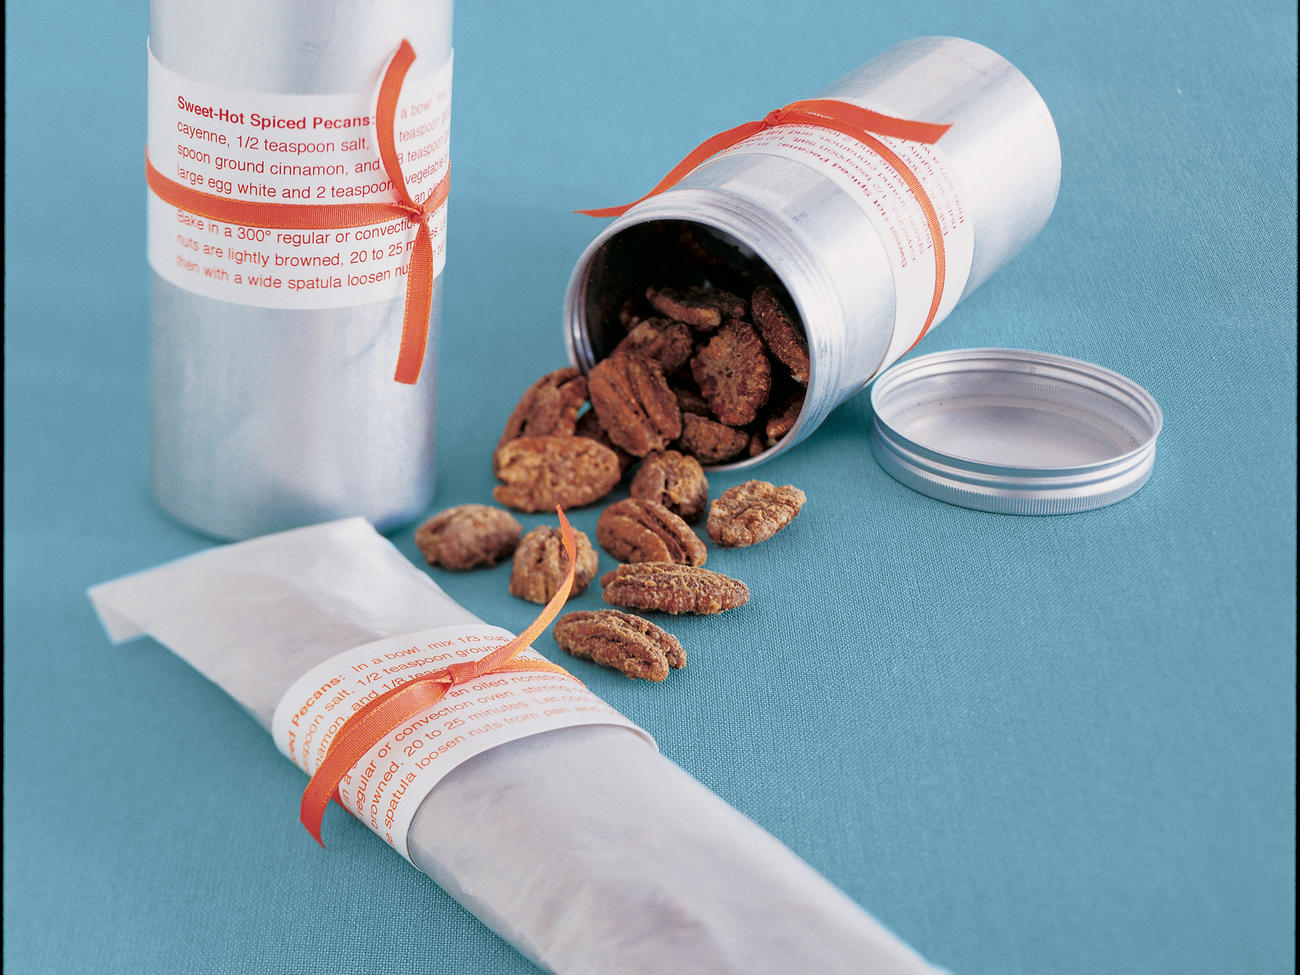 Sweet-Hot Spiced Pecans